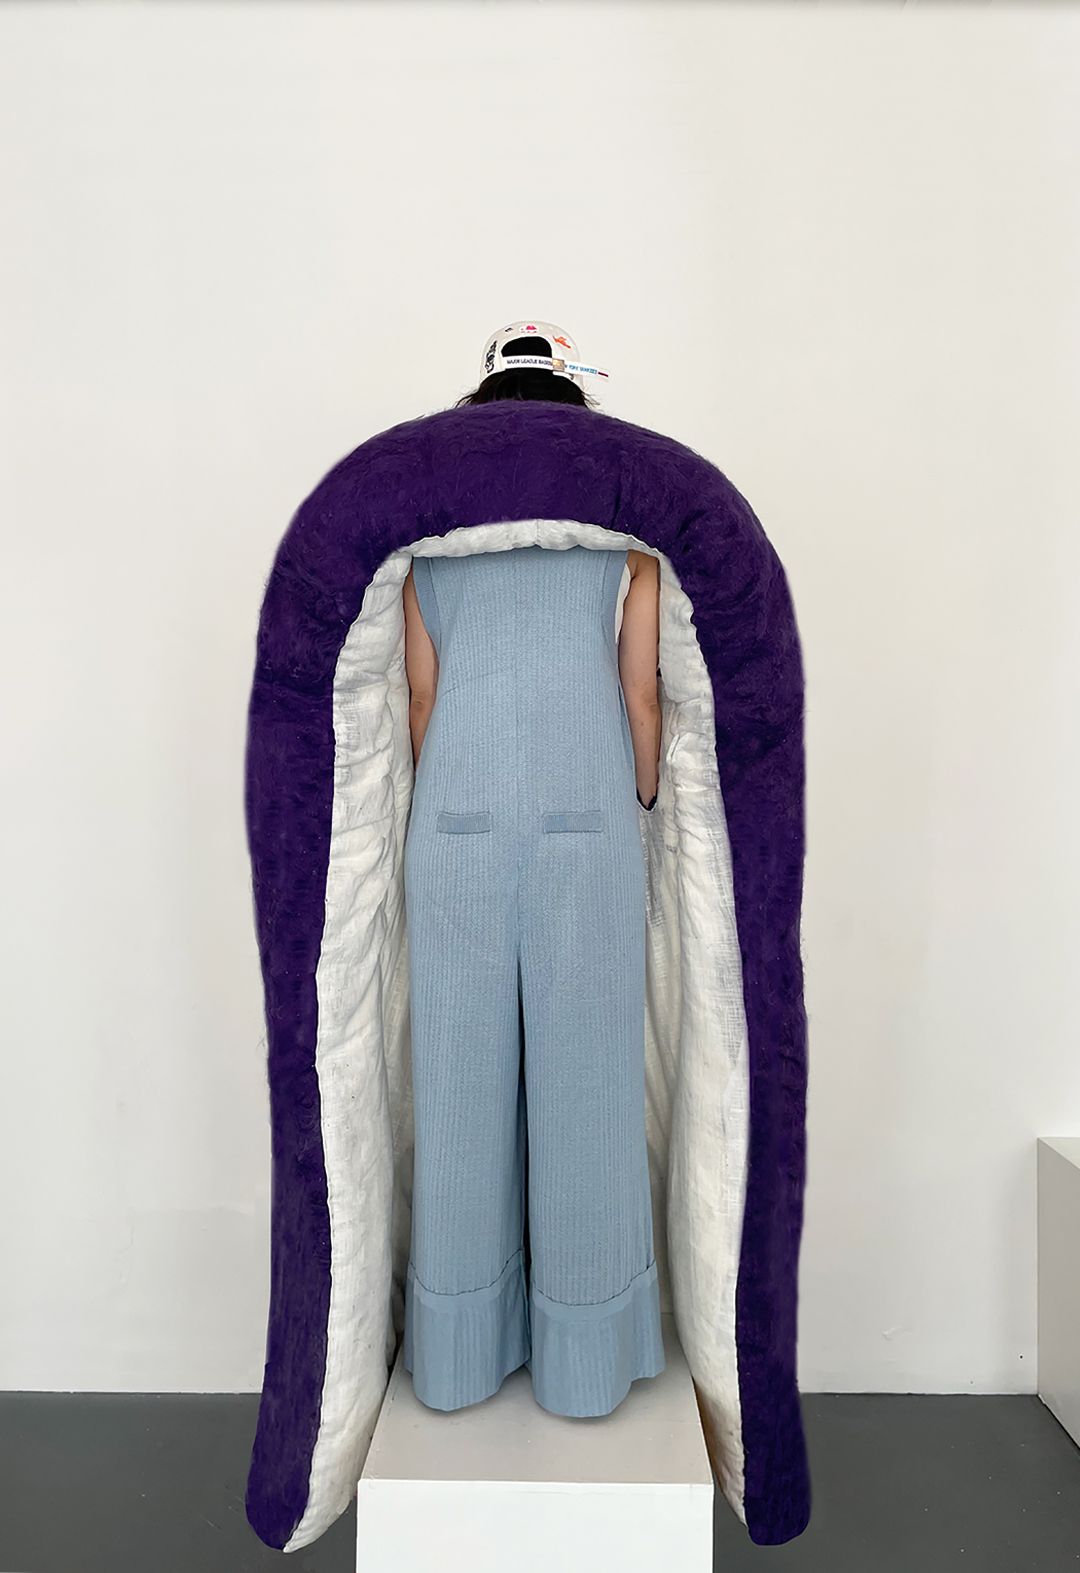 The garment, inspired by the back structure of a sofa or mattress, creates a forever bed for the dead.